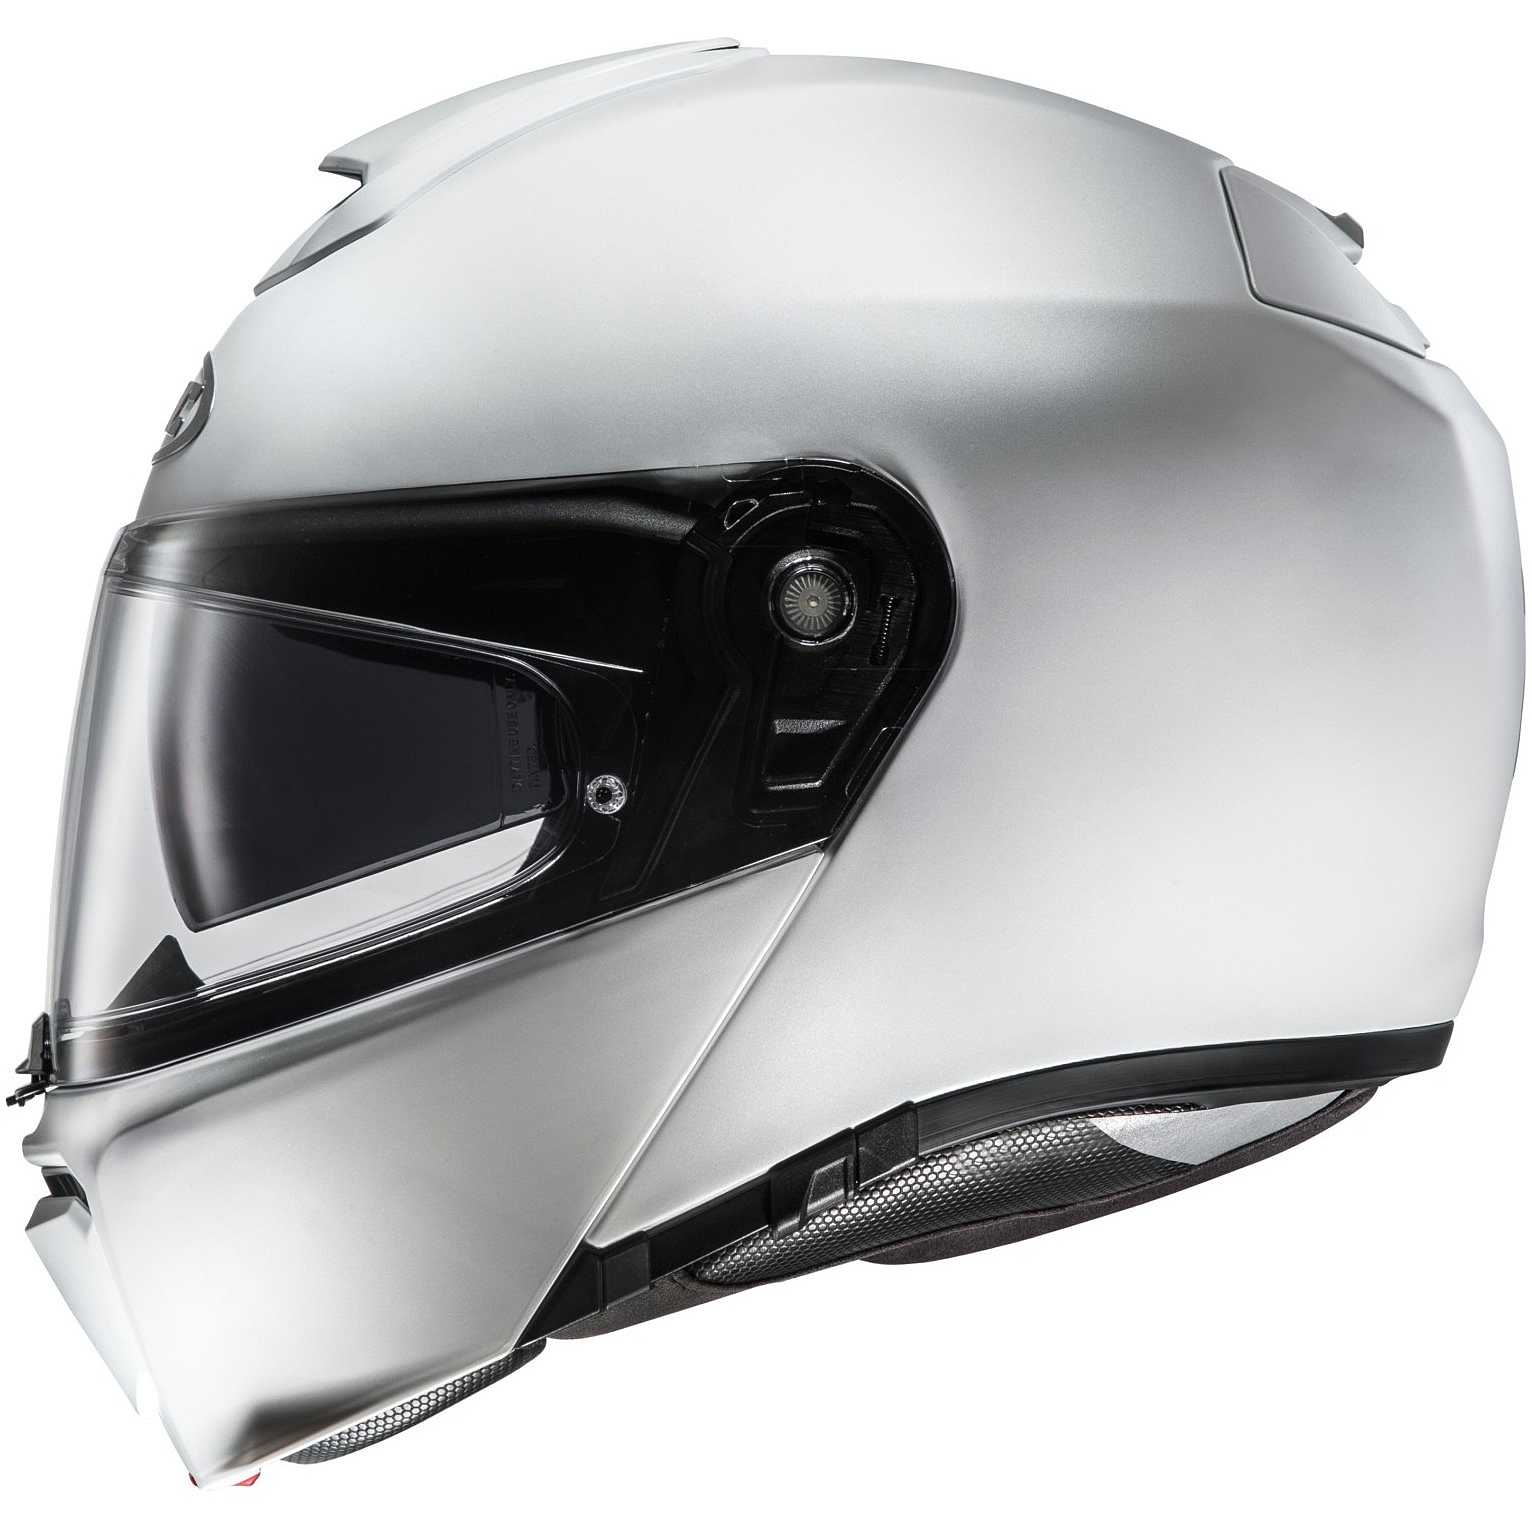 HJC Casque Moto RPHA 90 Perle, Blanc, Taille XS